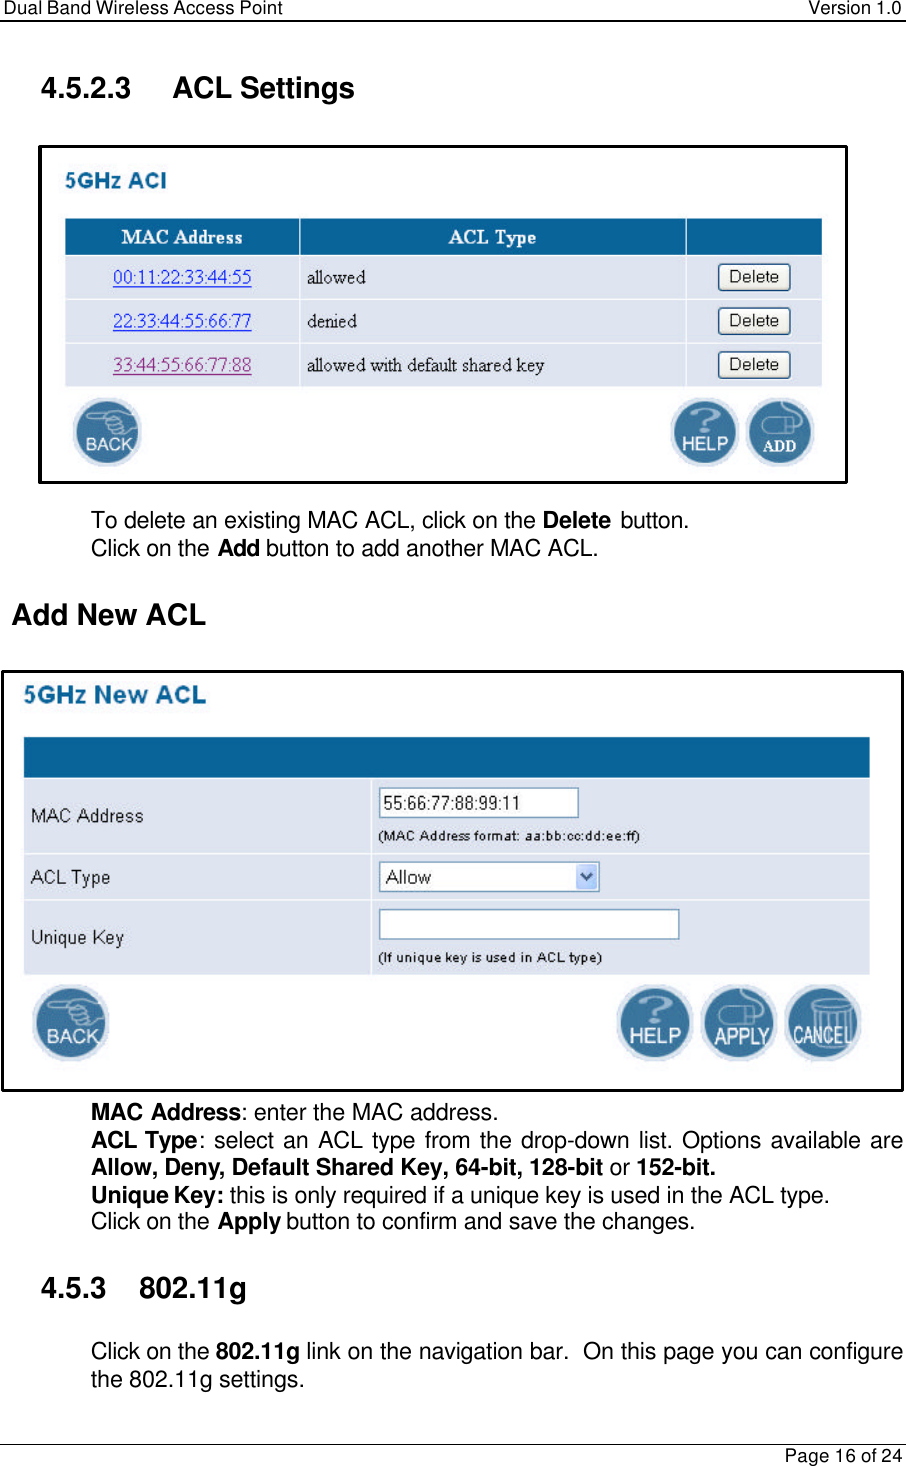 Dual Band Wireless Access Point Version 1.0Page 16 of 244.5.2.3 ACL Settings To delete an existing MAC ACL, click on the Delete button. Click on the Add button to add another MAC ACL. Add New ACL MAC Address: enter the MAC address. ACL Type: select an ACL type from the drop-down list. Options available areAllow, Deny, Default Shared Key, 64-bit, 128-bit or 152-bit. Unique Key: this is only required if a unique key is used in the ACL type. Click on the Apply button to confirm and save the changes.4.5.3    802.11g Click on the 802.11g link on the navigation bar.  On this page you can configurethe 802.11g settings.